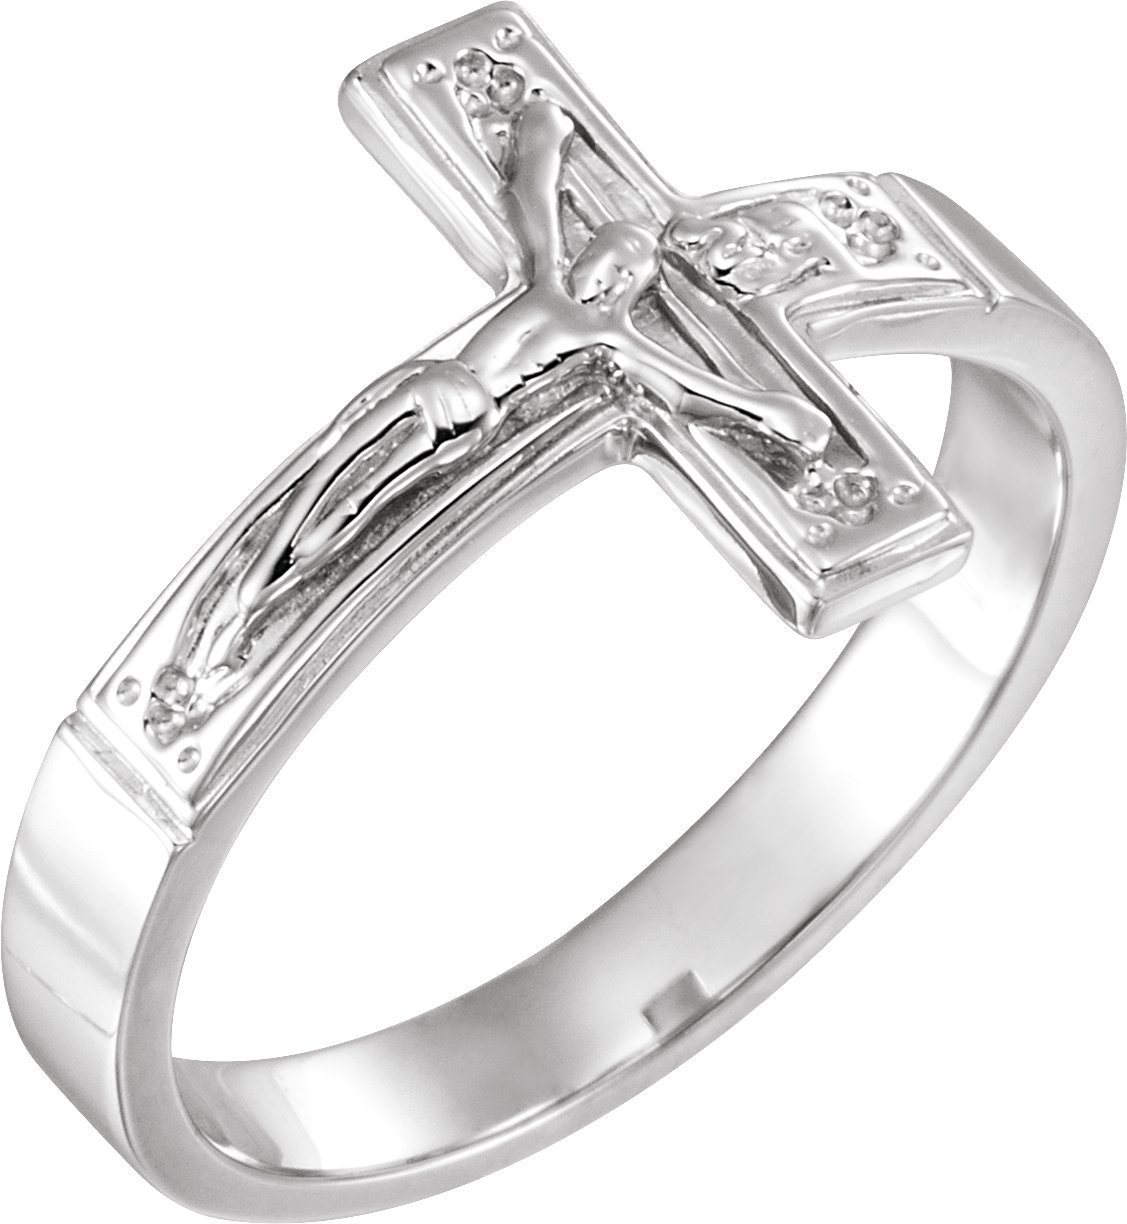 Sterling Silver 12 mm Crucifix Chastity Ring Size 7